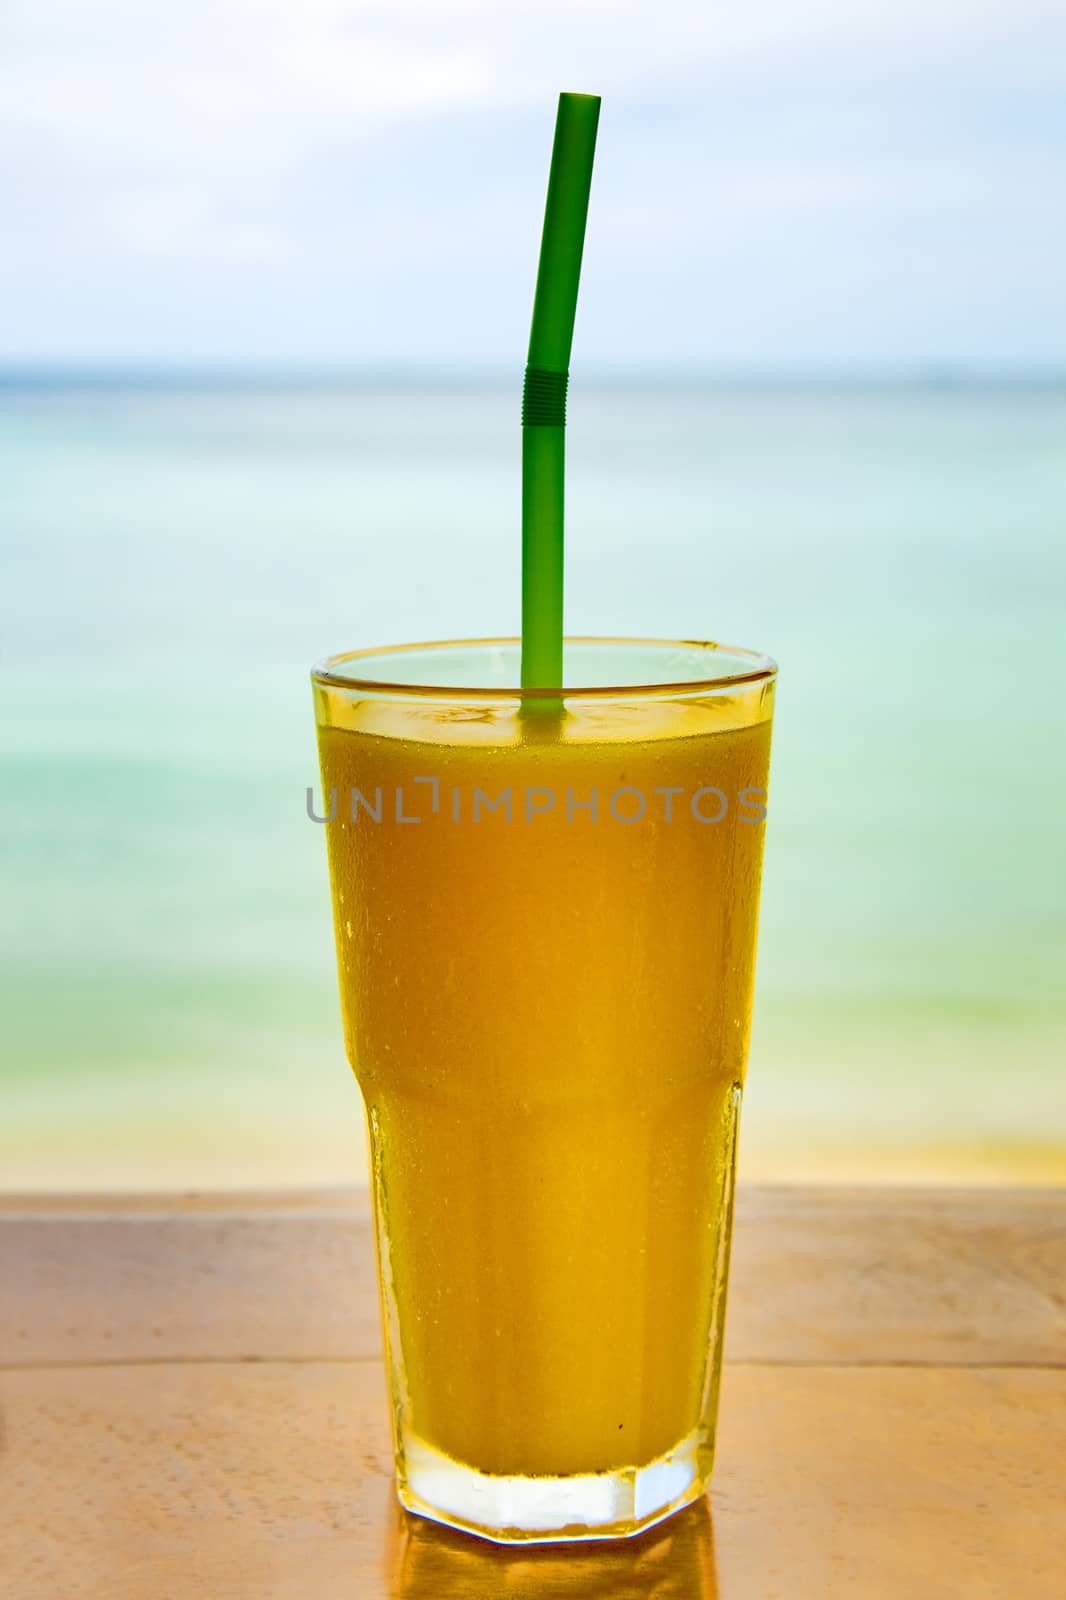 glass of  mango juice on the wooden table  against of the  sea